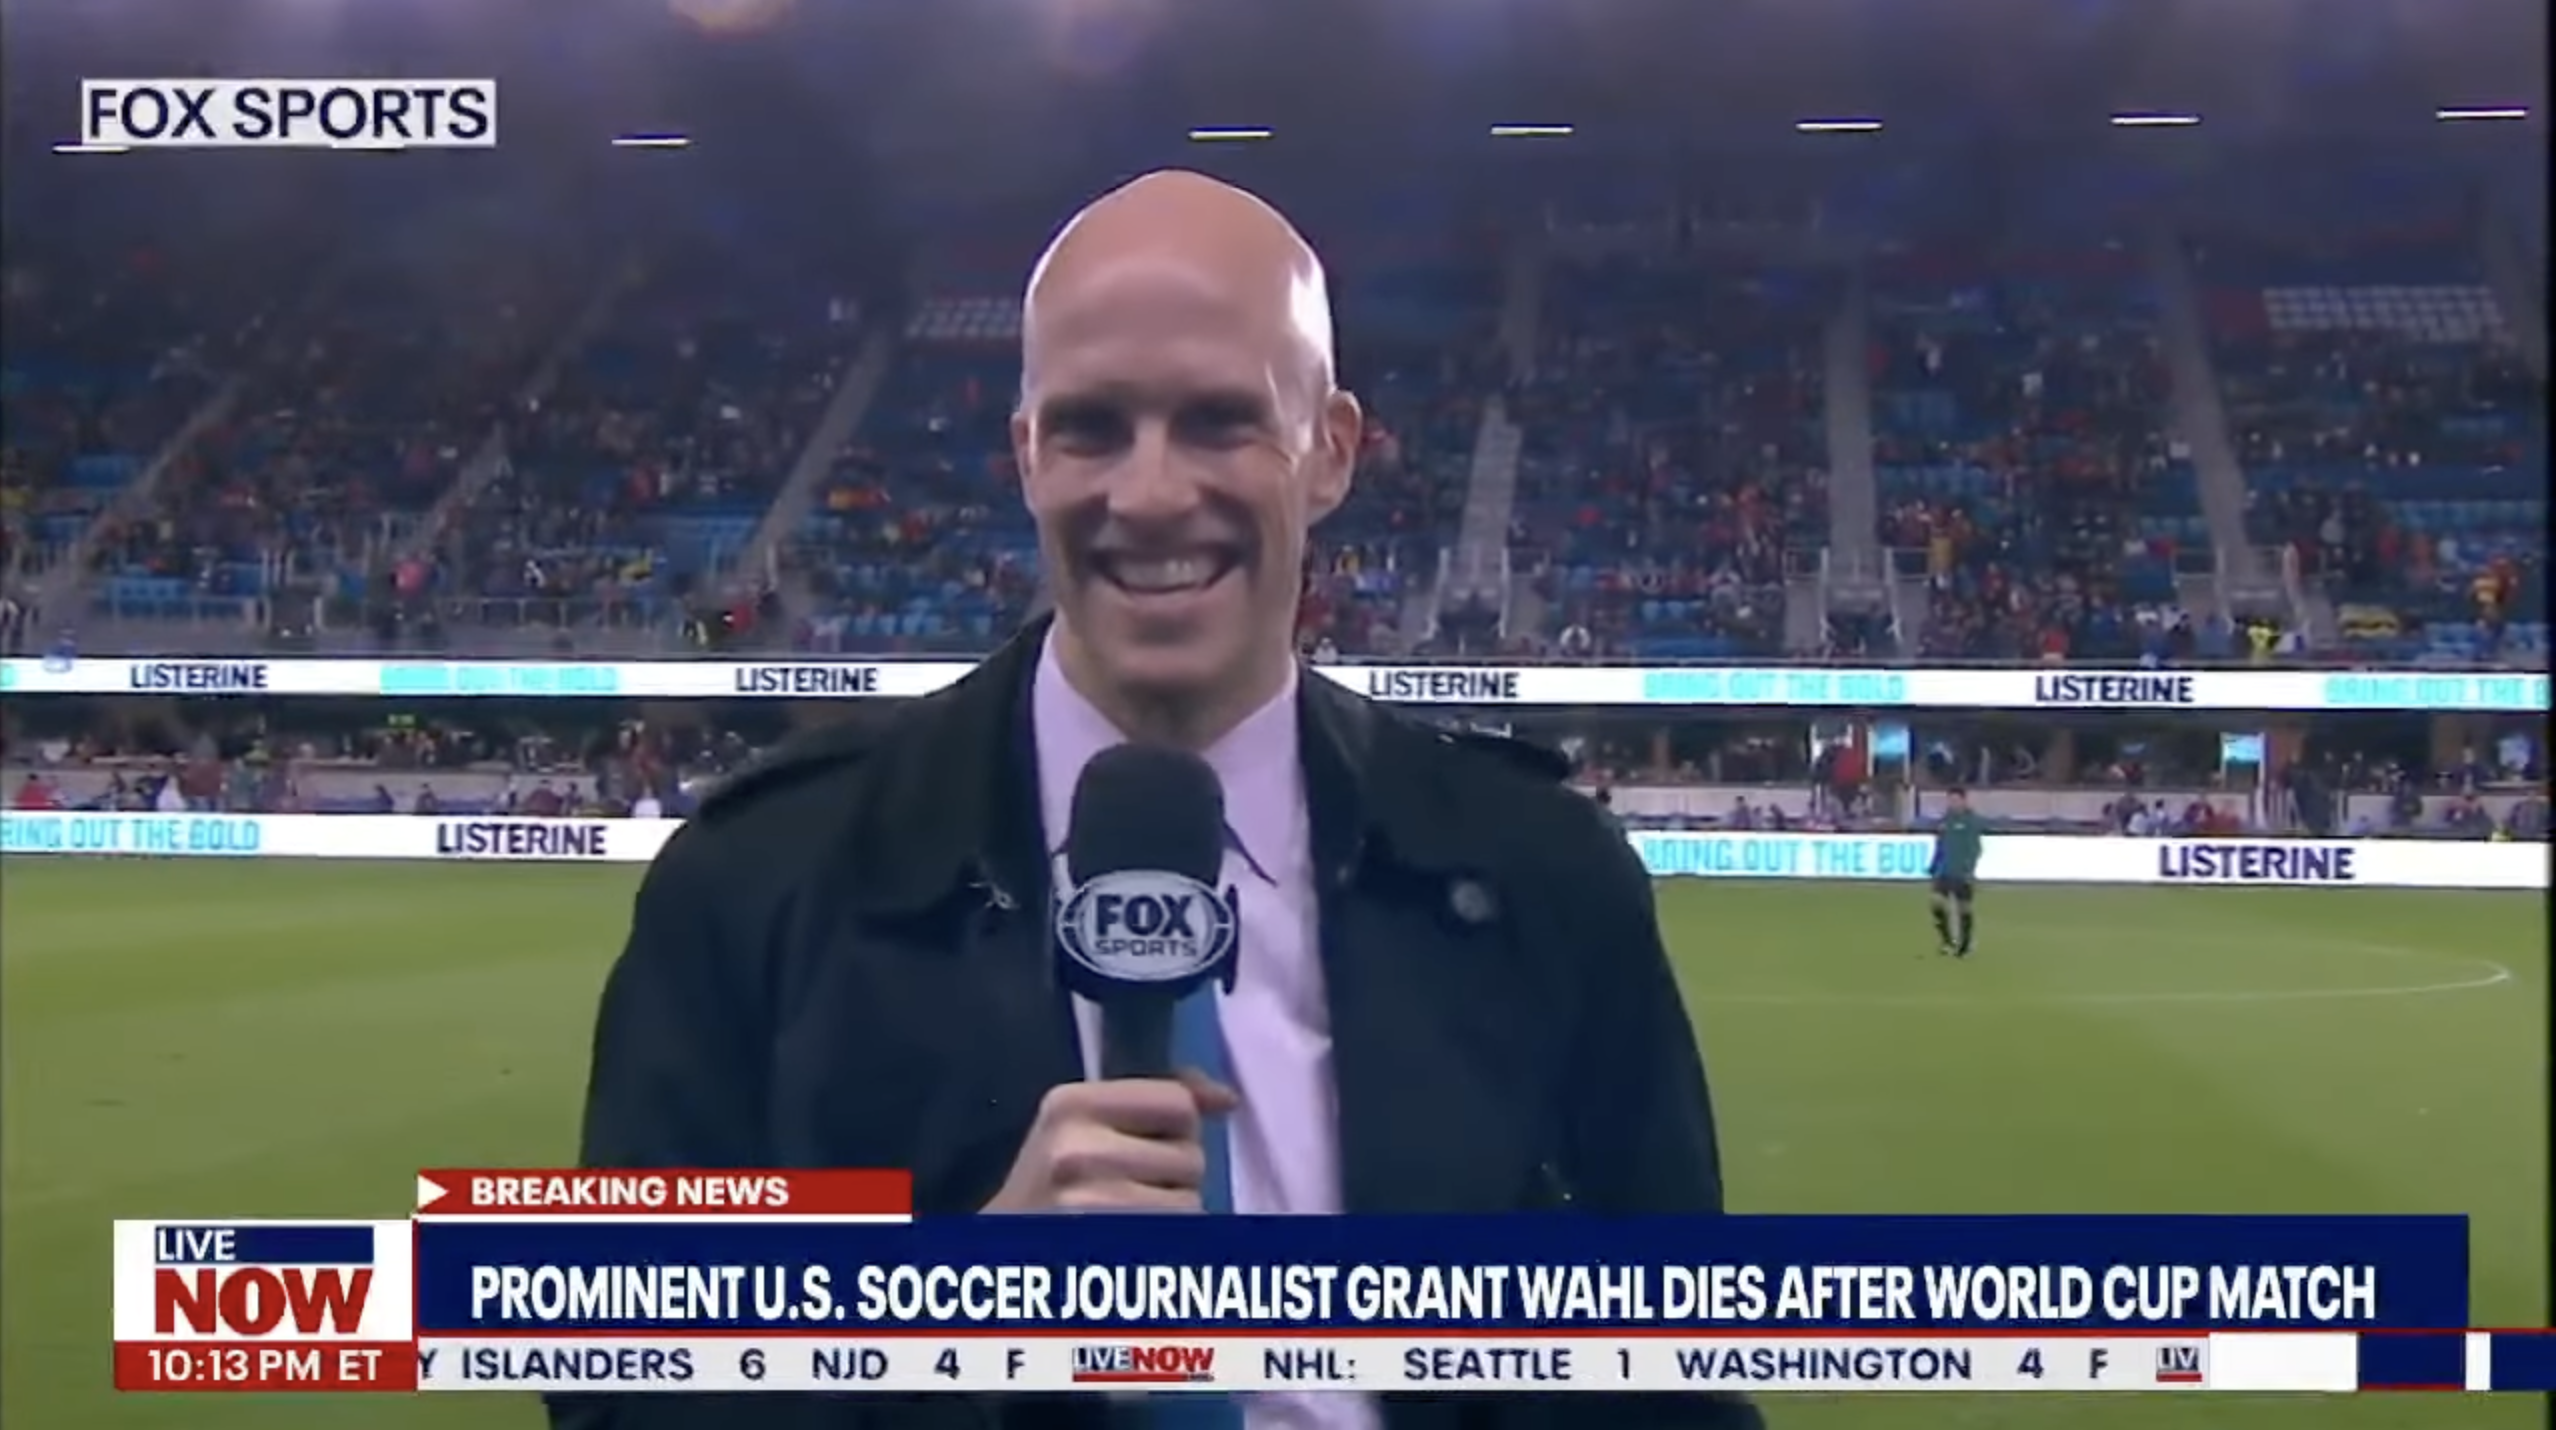 BREAKING: U.S. Journalist Grant Wahl Collapses And Dies While Covering World Cup Soccer Games